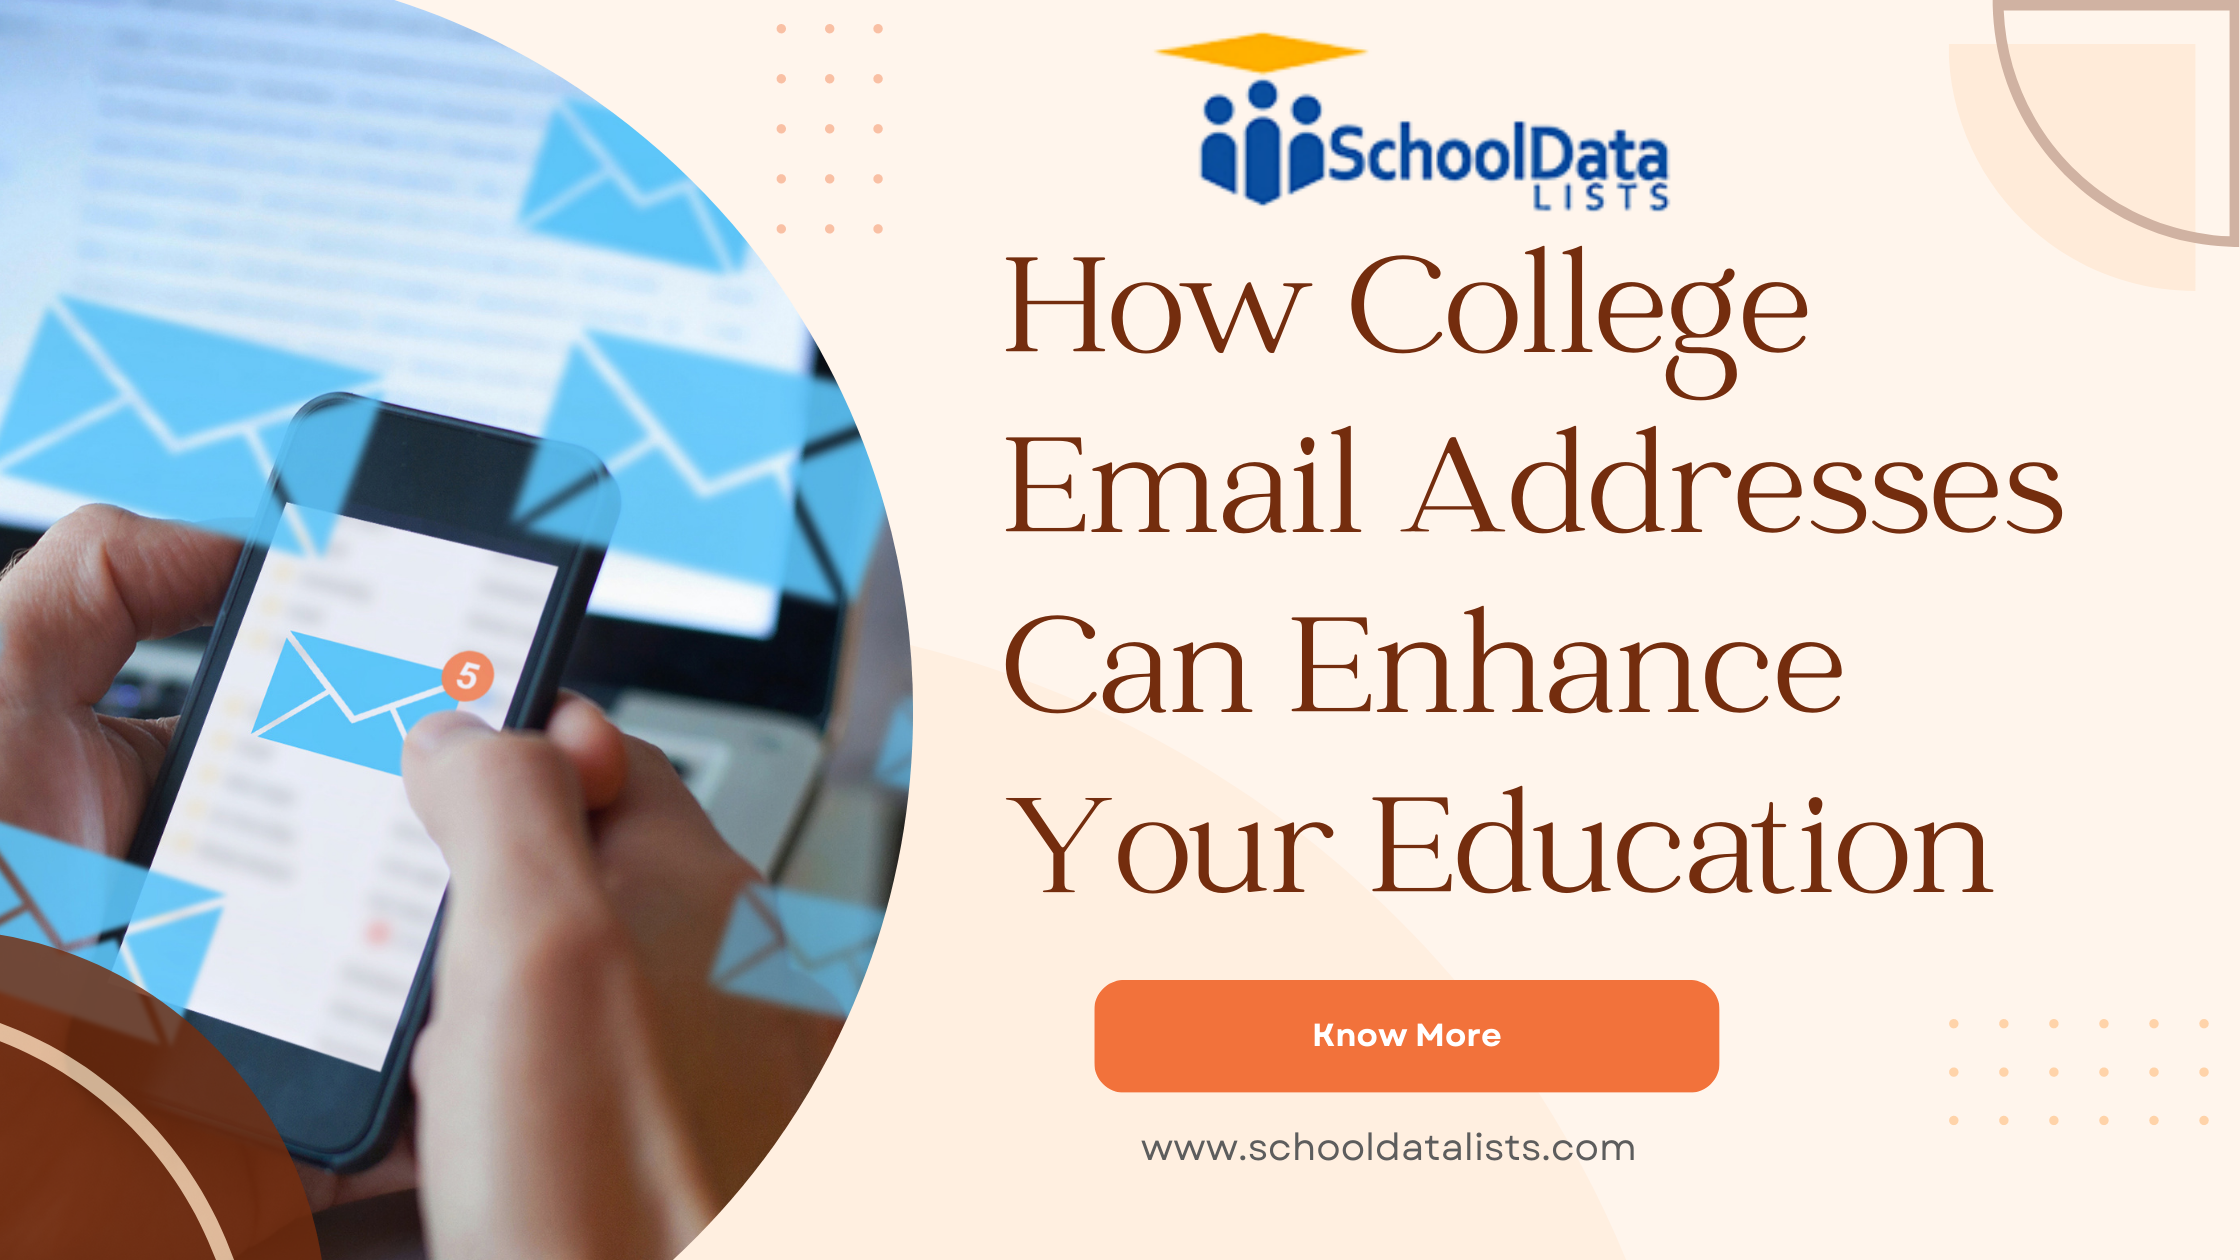 How College Email Addresses Can Enhance Your Education